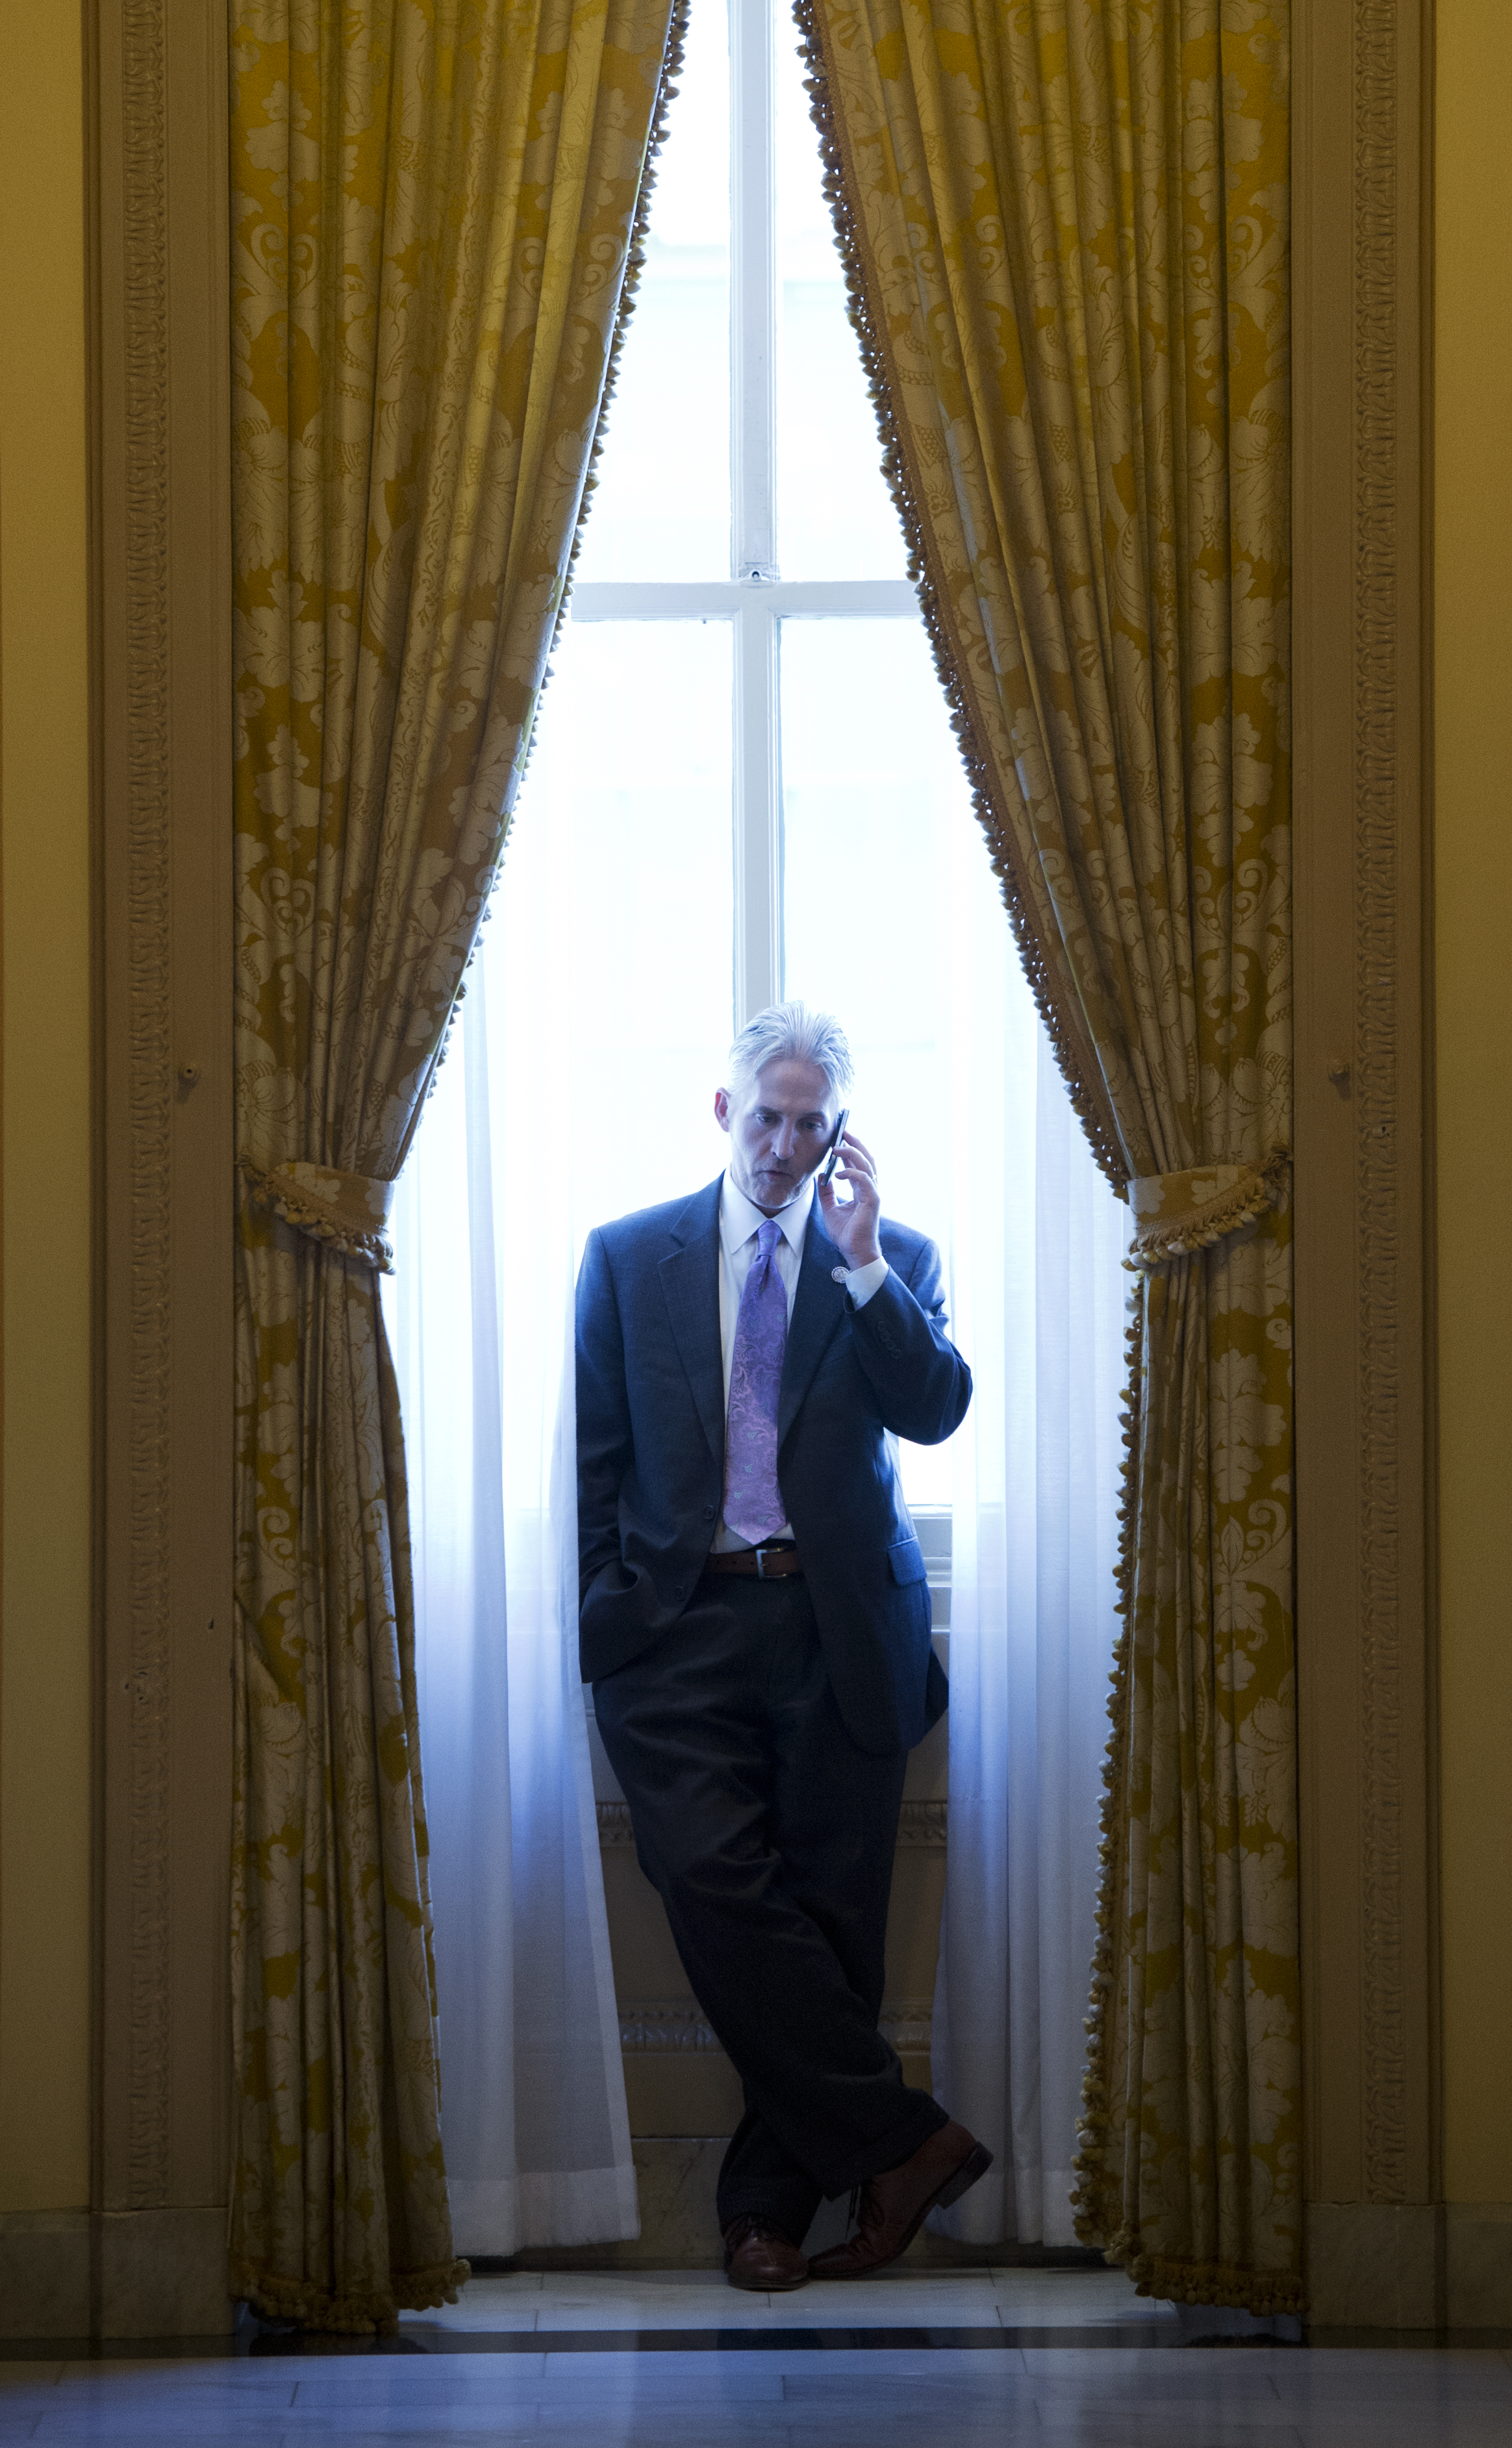 Rep. Trey Gowdy, R-S.C., talks on the phone on the House side of the Capitol. (Tom Williams—CQ/Roll Call,Inc.)